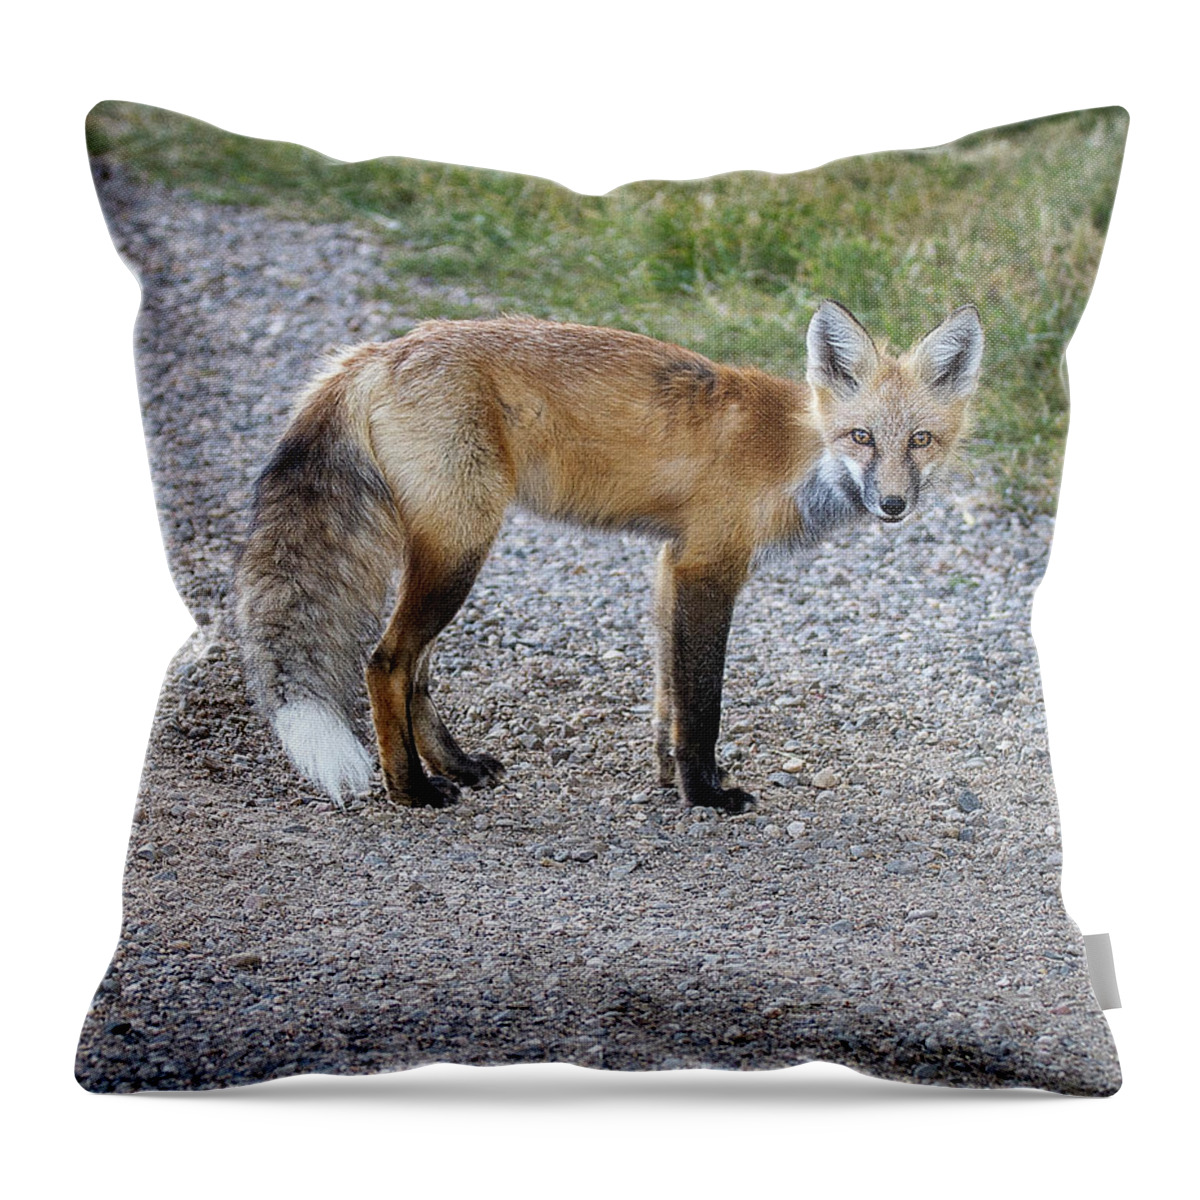 Red Fox Throw Pillow featuring the photograph Red Fox by Ronald Lutz